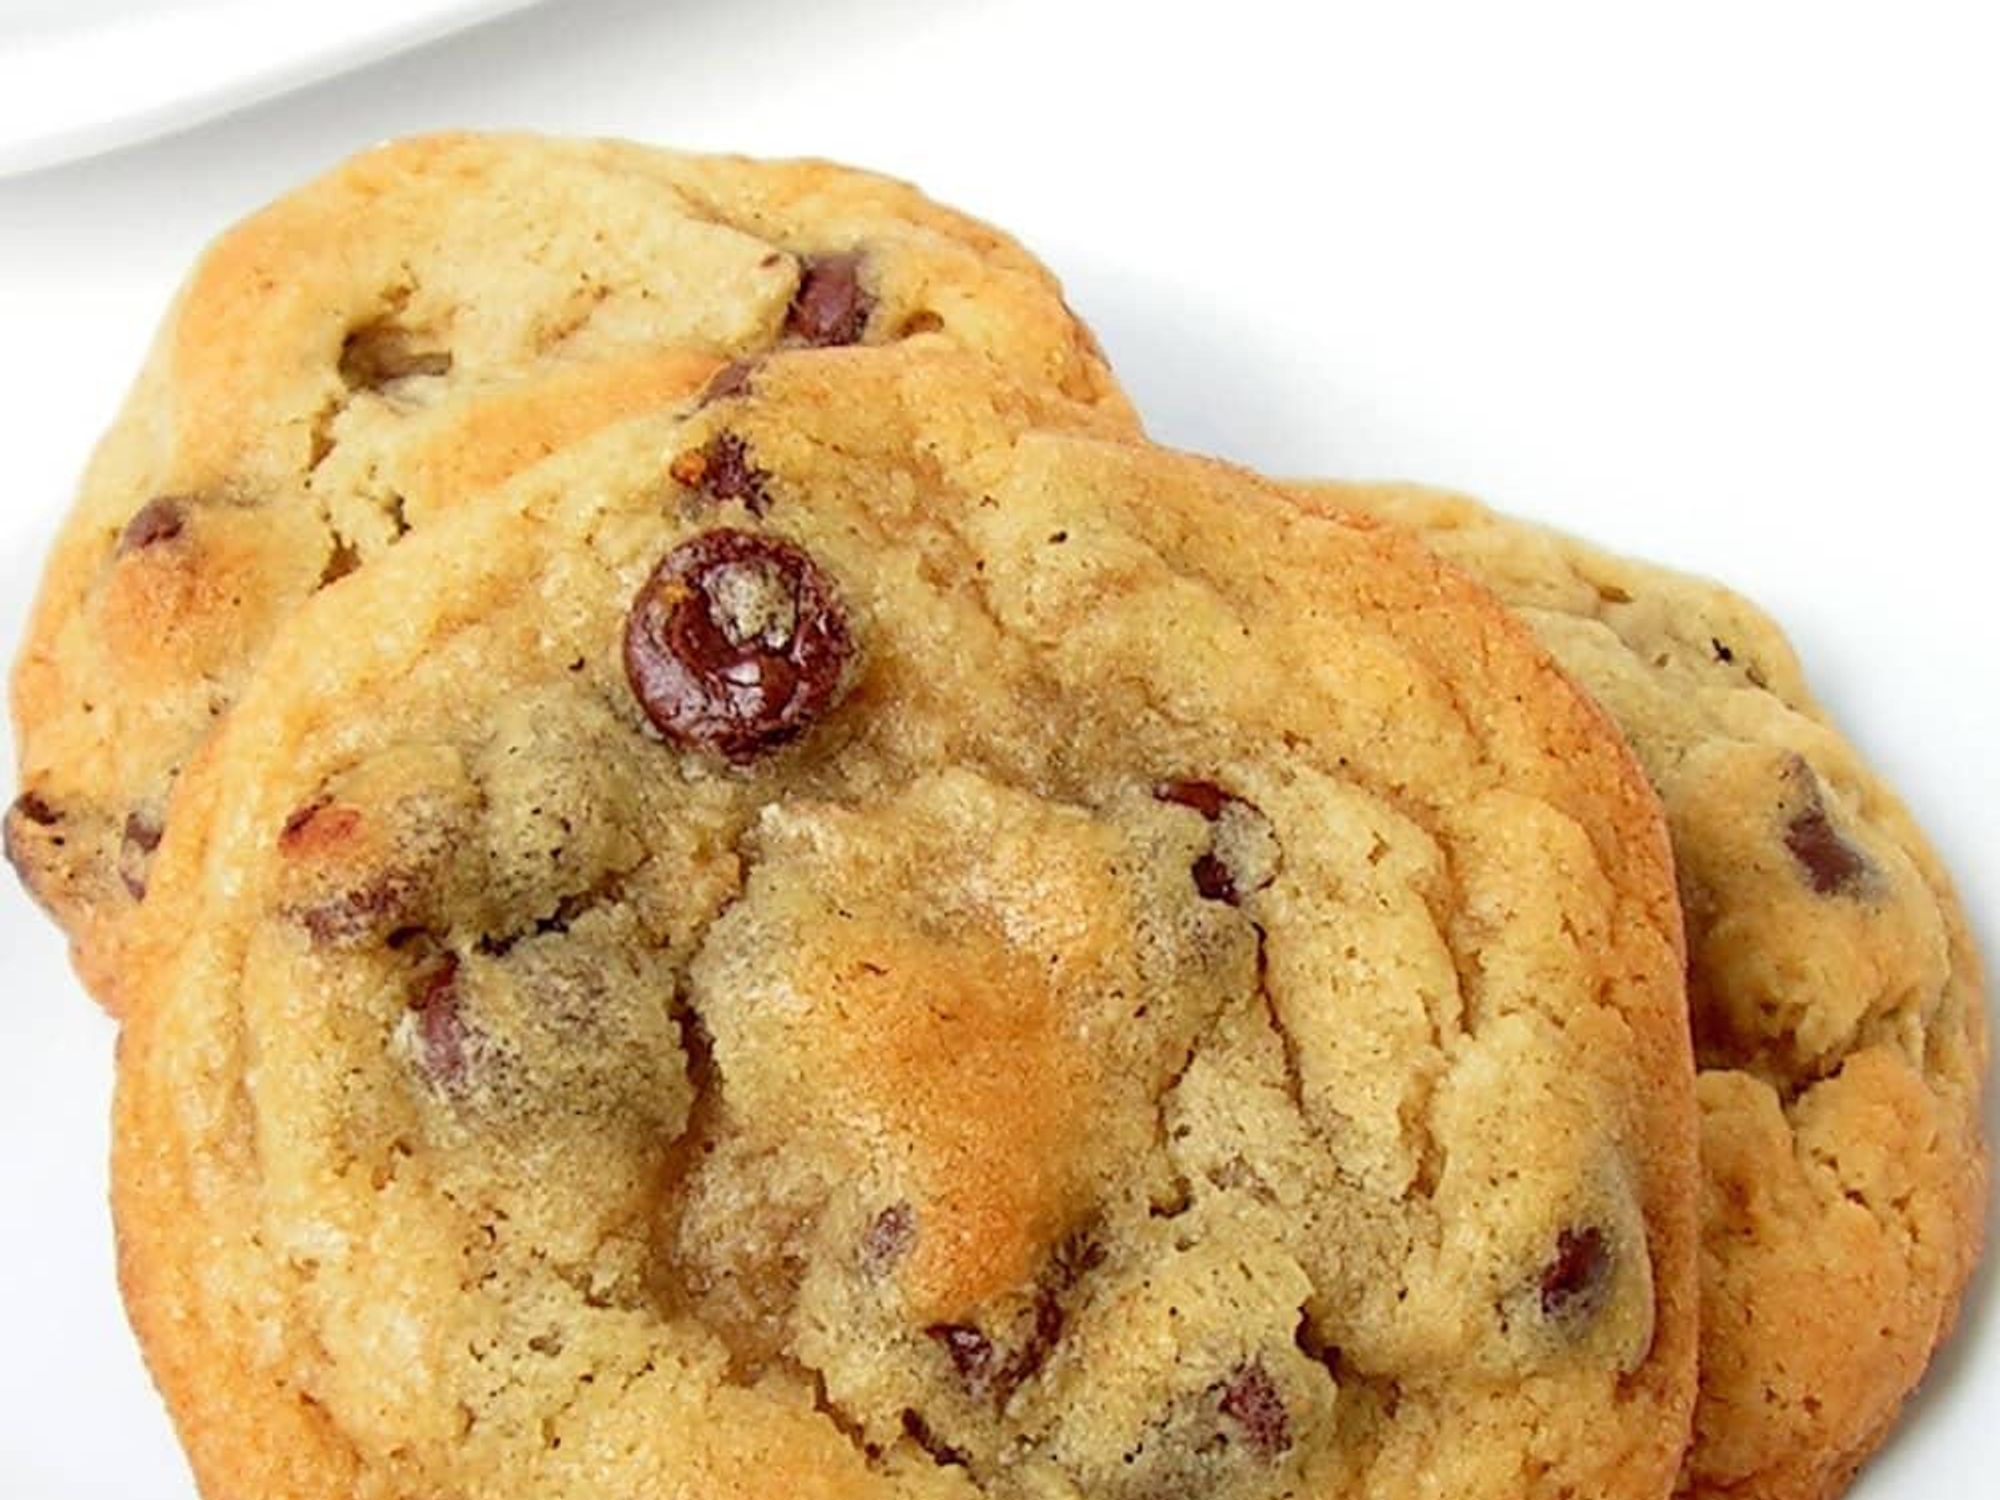 Chocolate chip cookies at Tiny Boxwoods